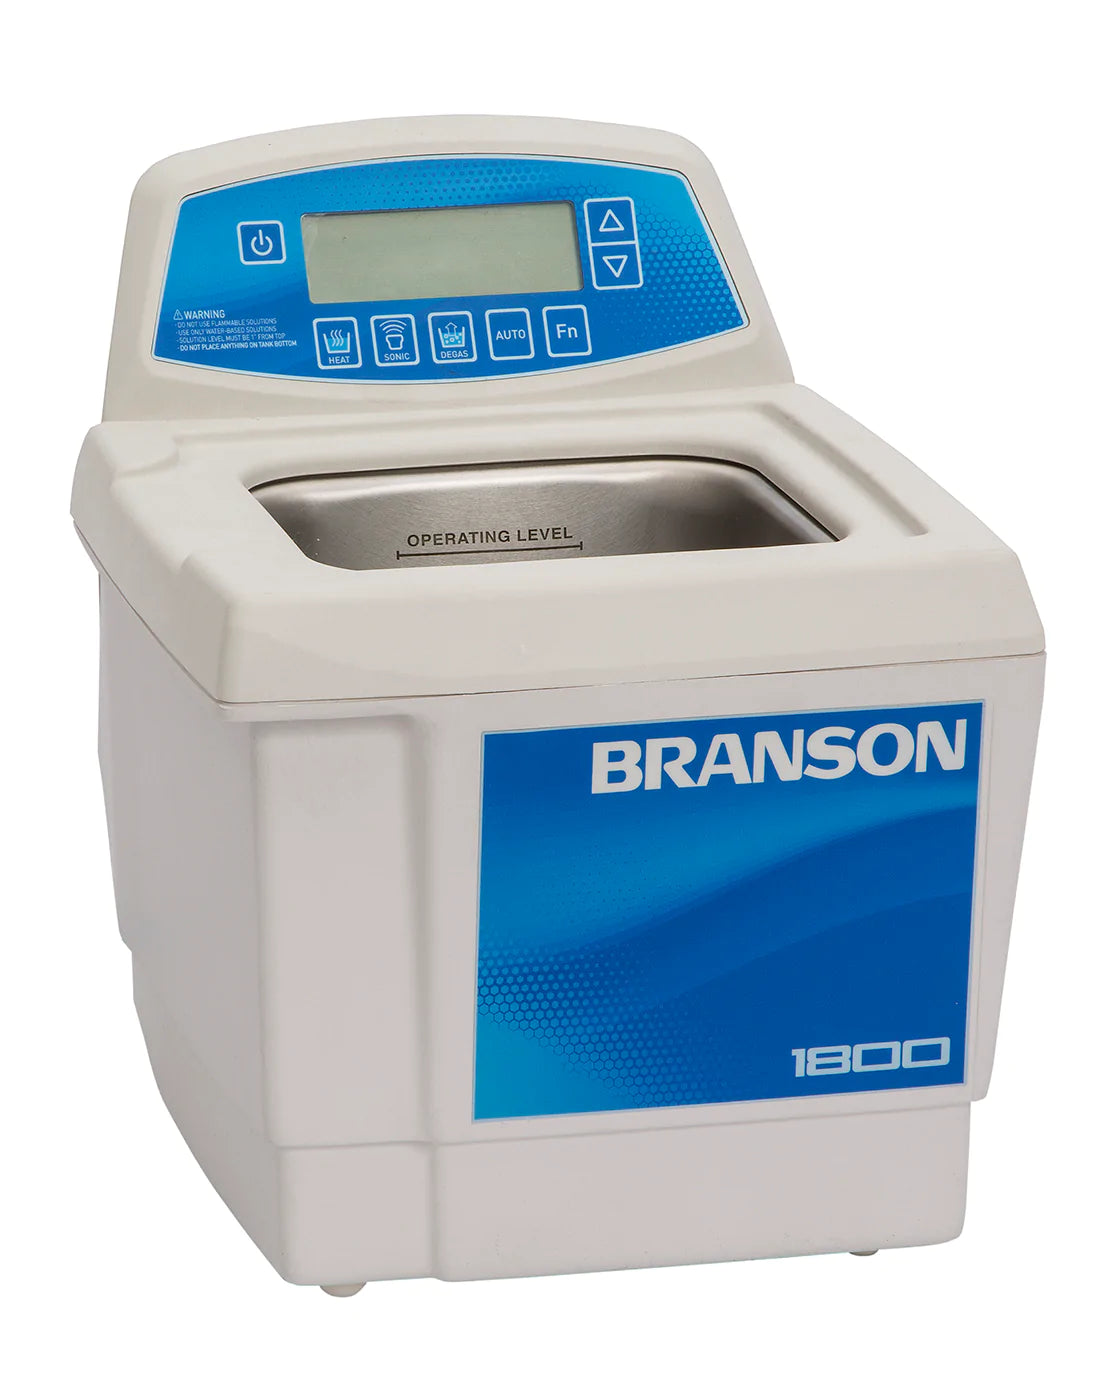 stainless-steel-solid-tray-for-branson-5500-5800-ultrasonic-cleaners-100-410-176